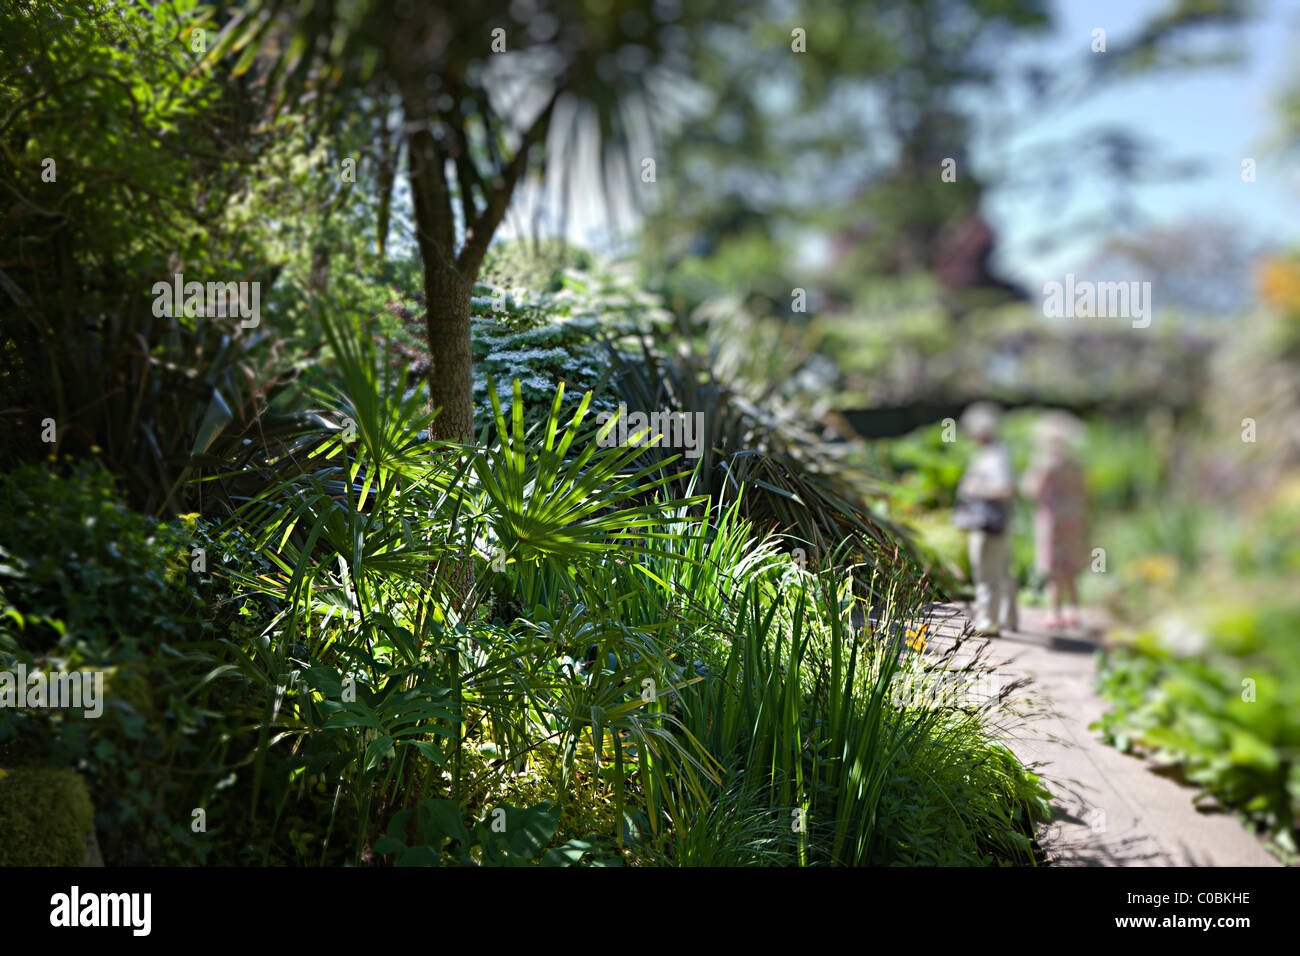 Ferns in sunken garden with differential focus and two women in background Dewstow gardens Wales UK Stock Photo